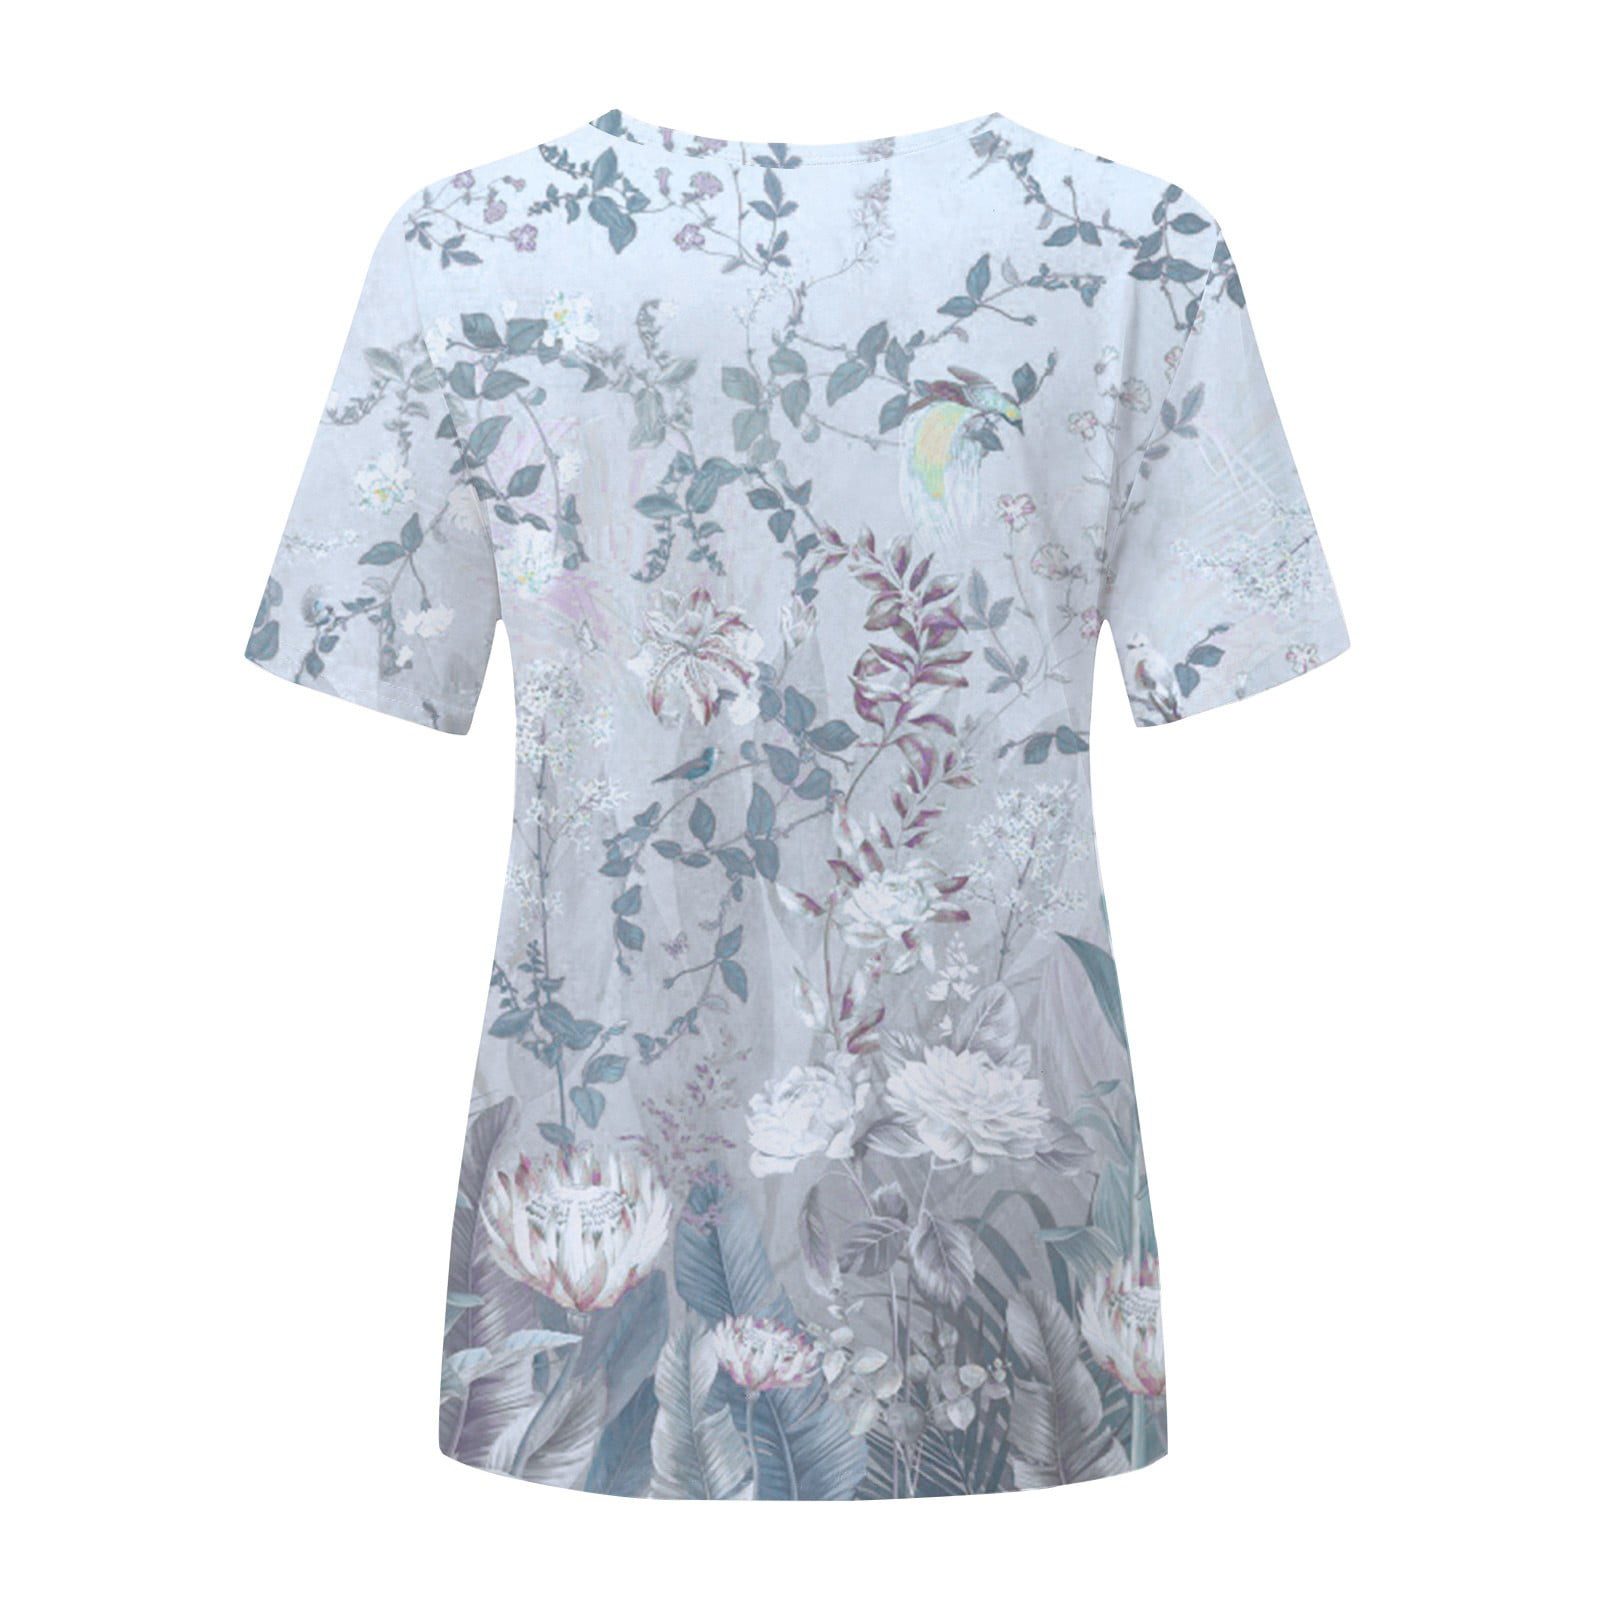 Size Sleeve Polyester,Spandex Printed S Short Casual Blouses JDEFEG Spandex Long Plus 4X Shirt Tee Floral Shirts Sleeve Neck Shirts T Crew Top Summer Womens Casual White